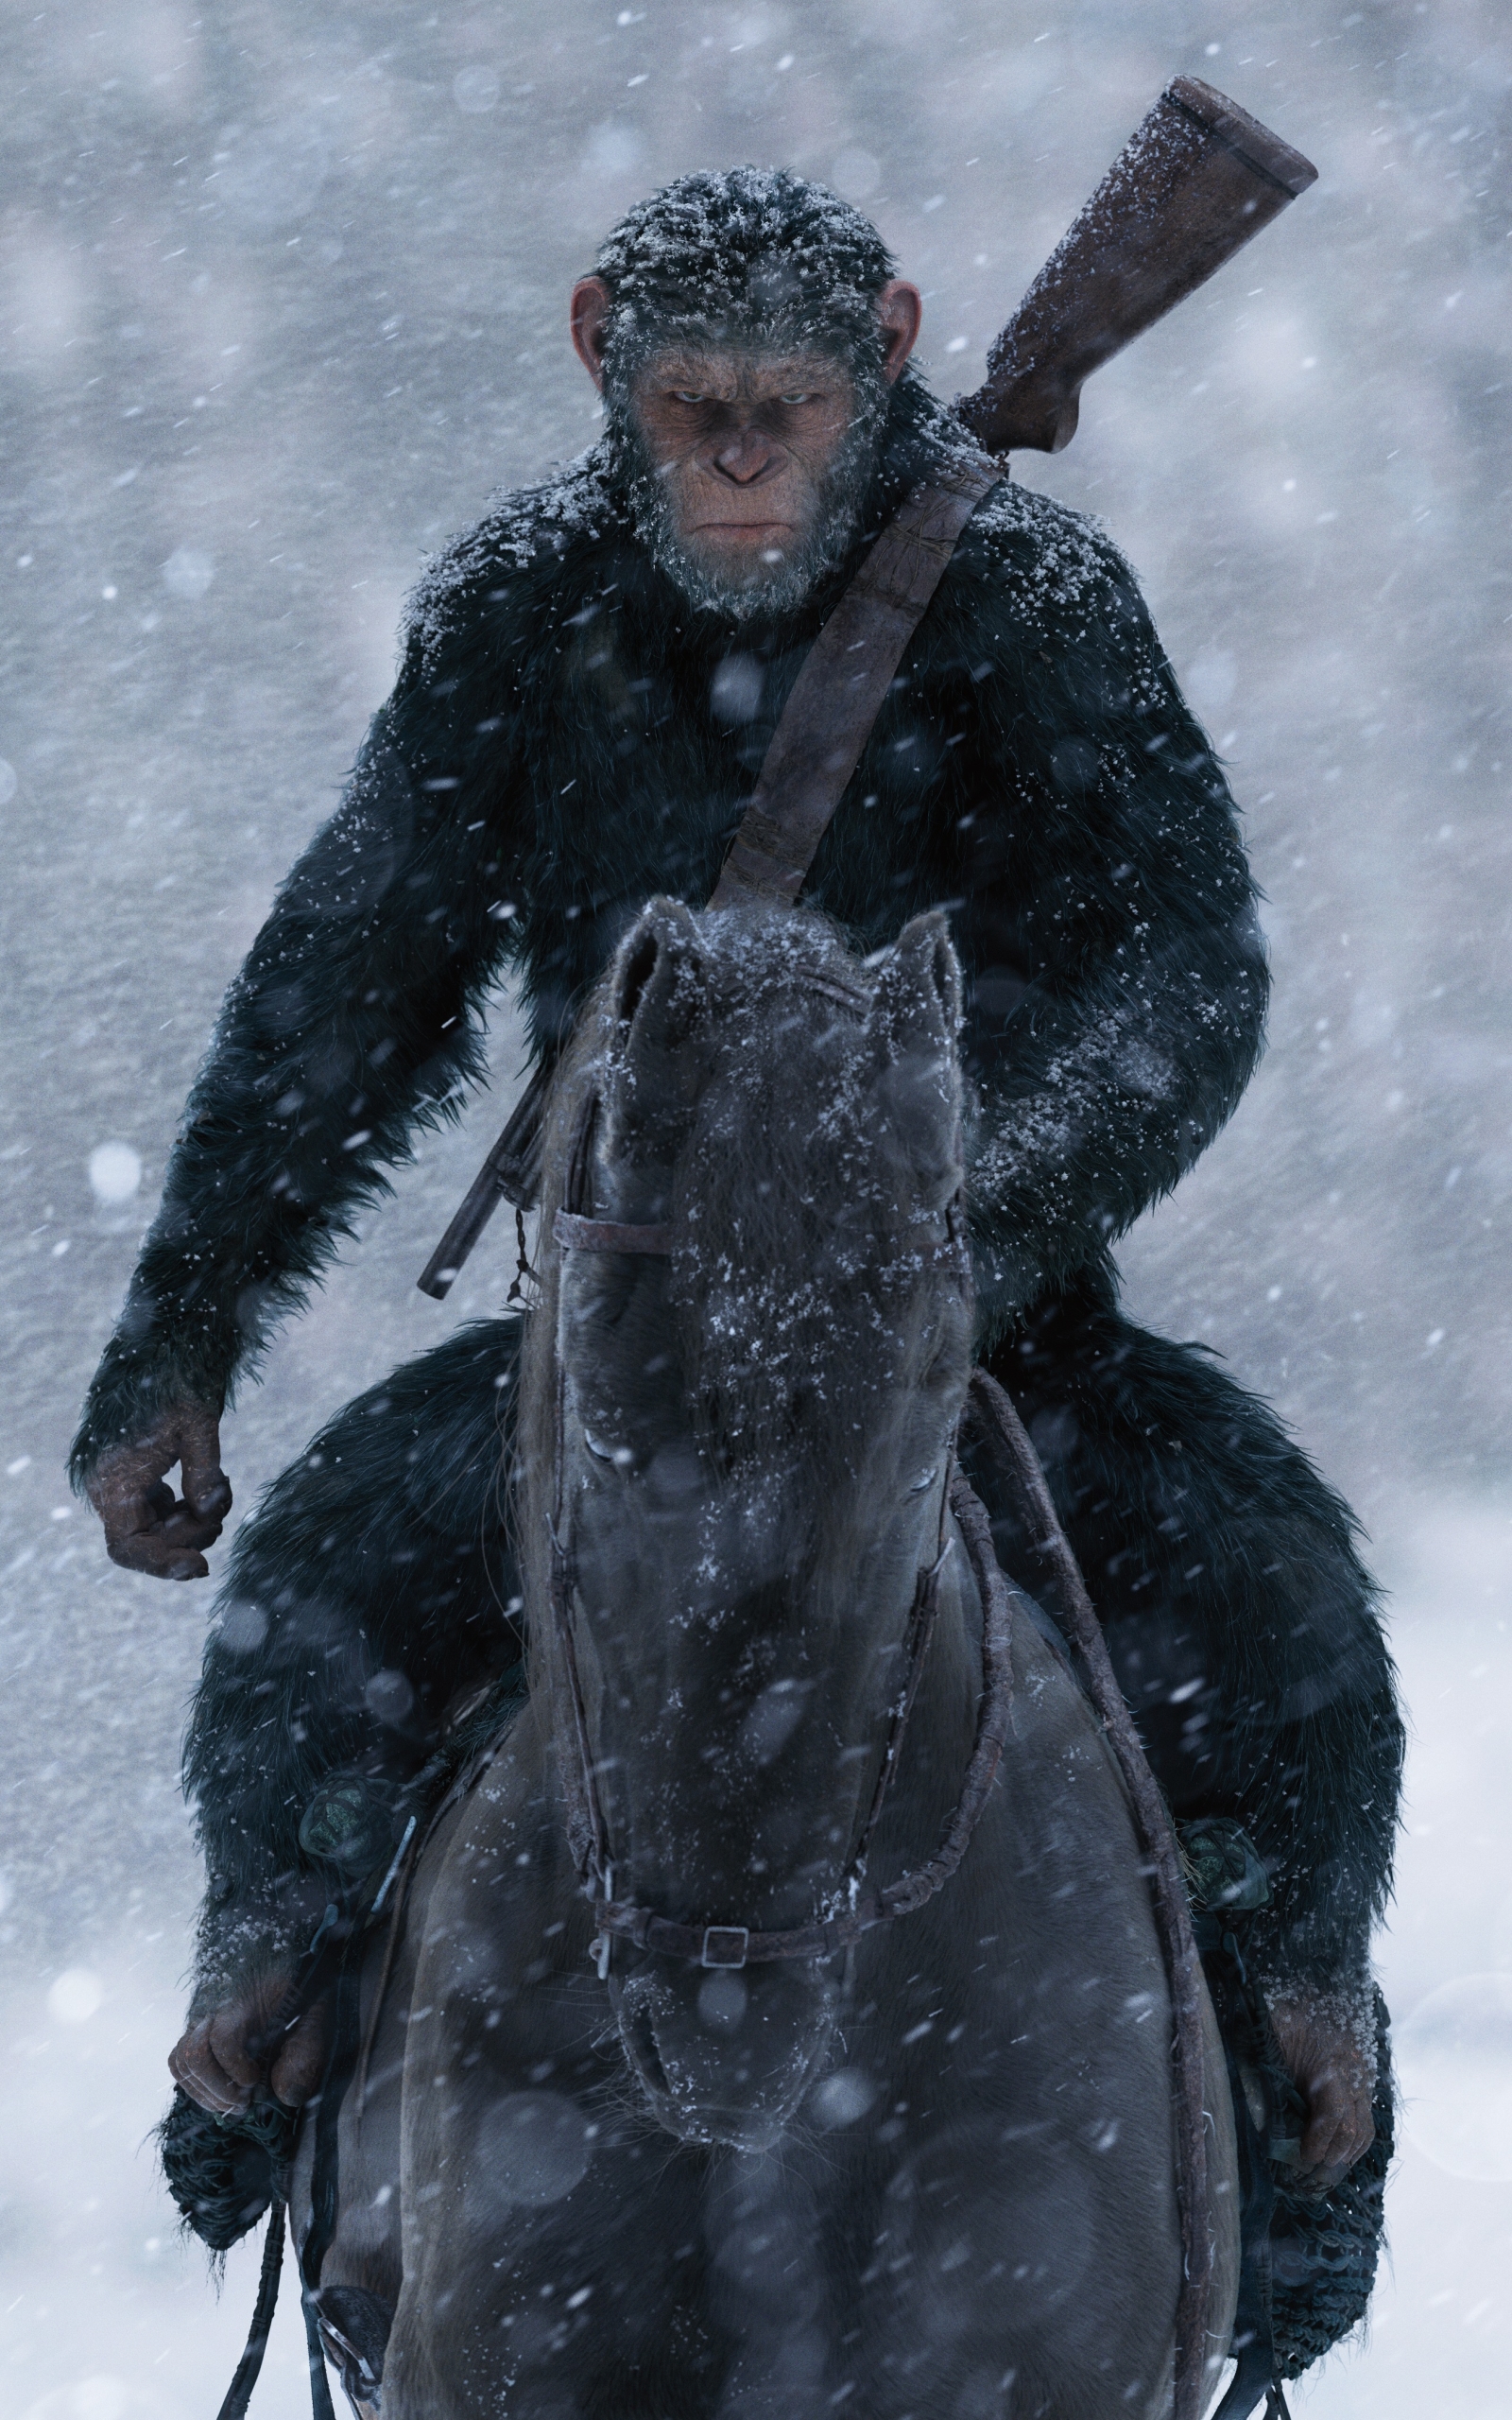 war for the planet of the apes, movie